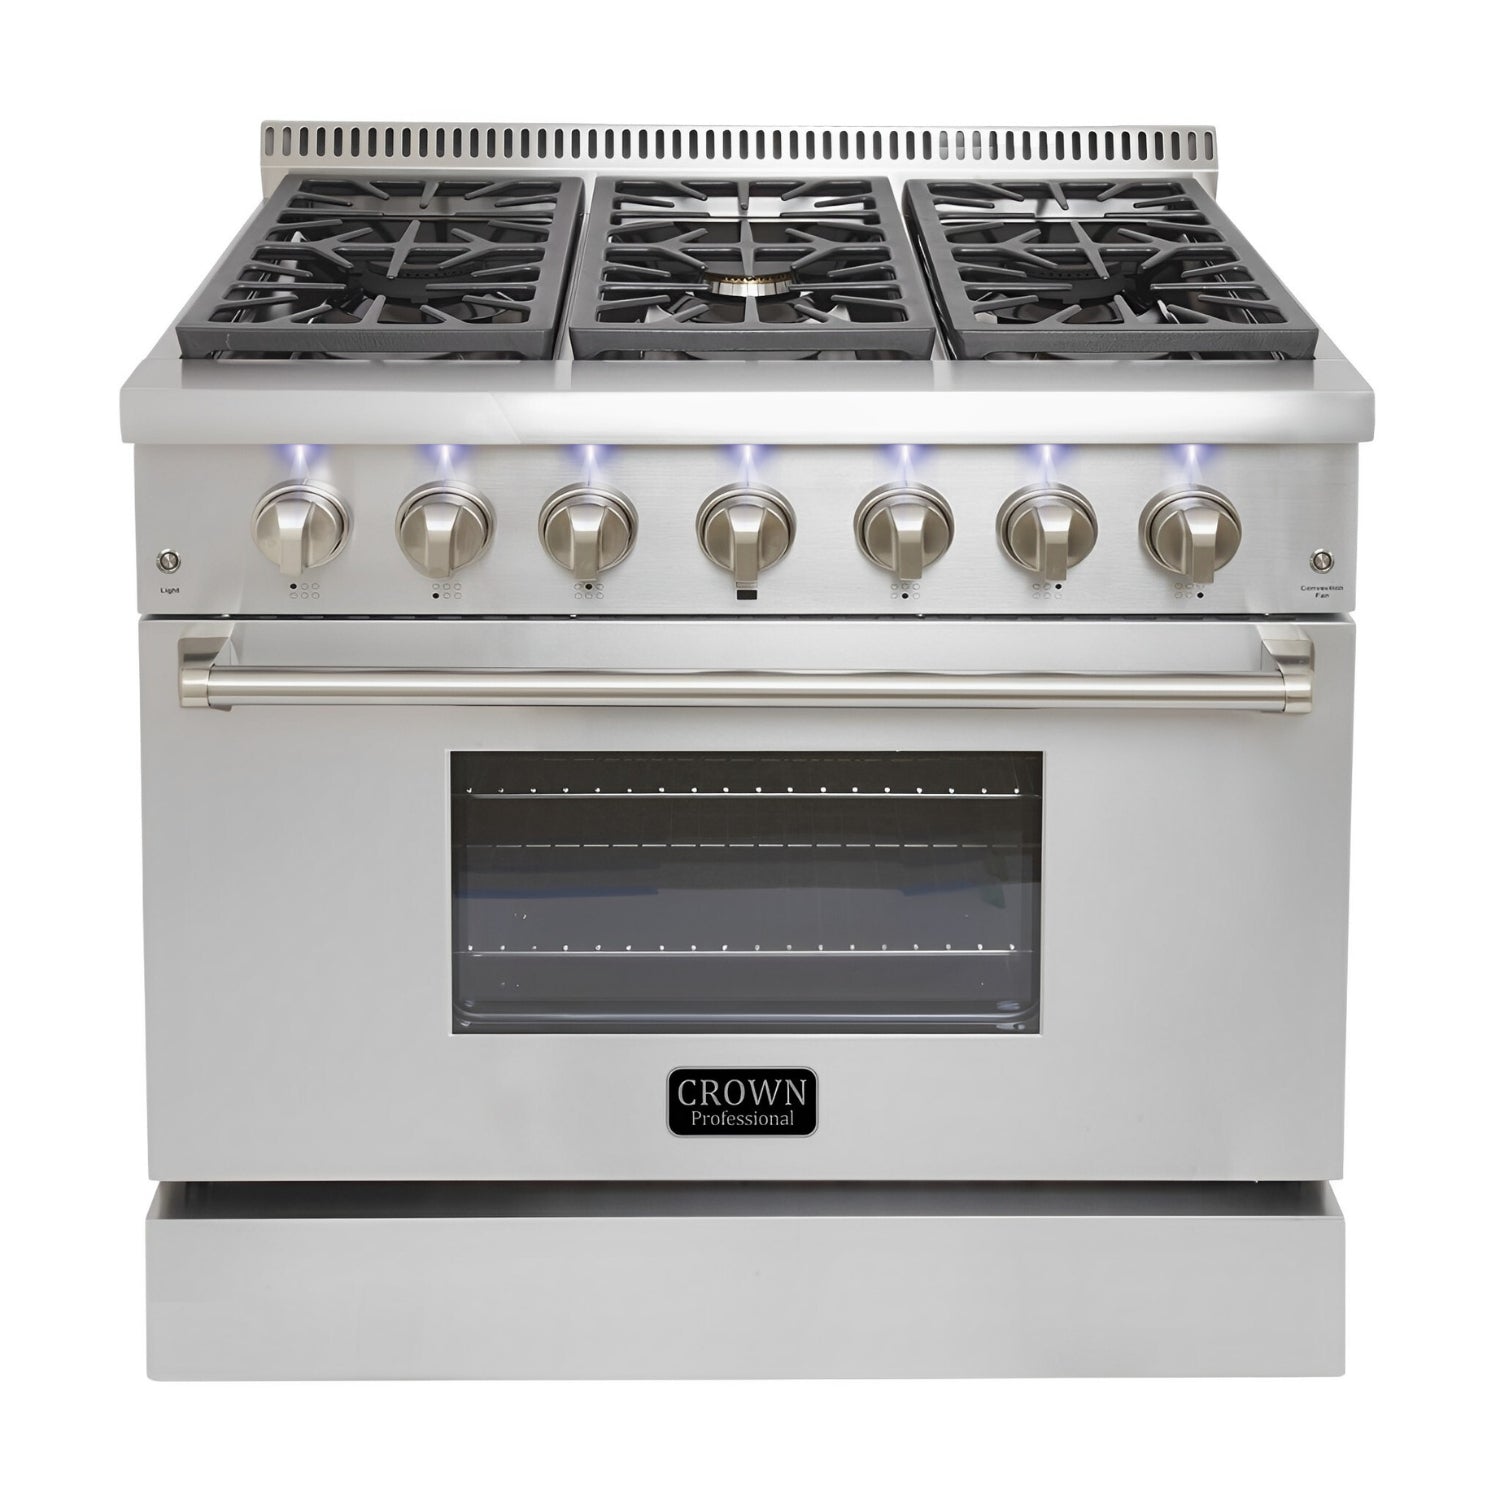 36" Crown Professional Stainless Steel Dual Fuel Gas Range ARD3601